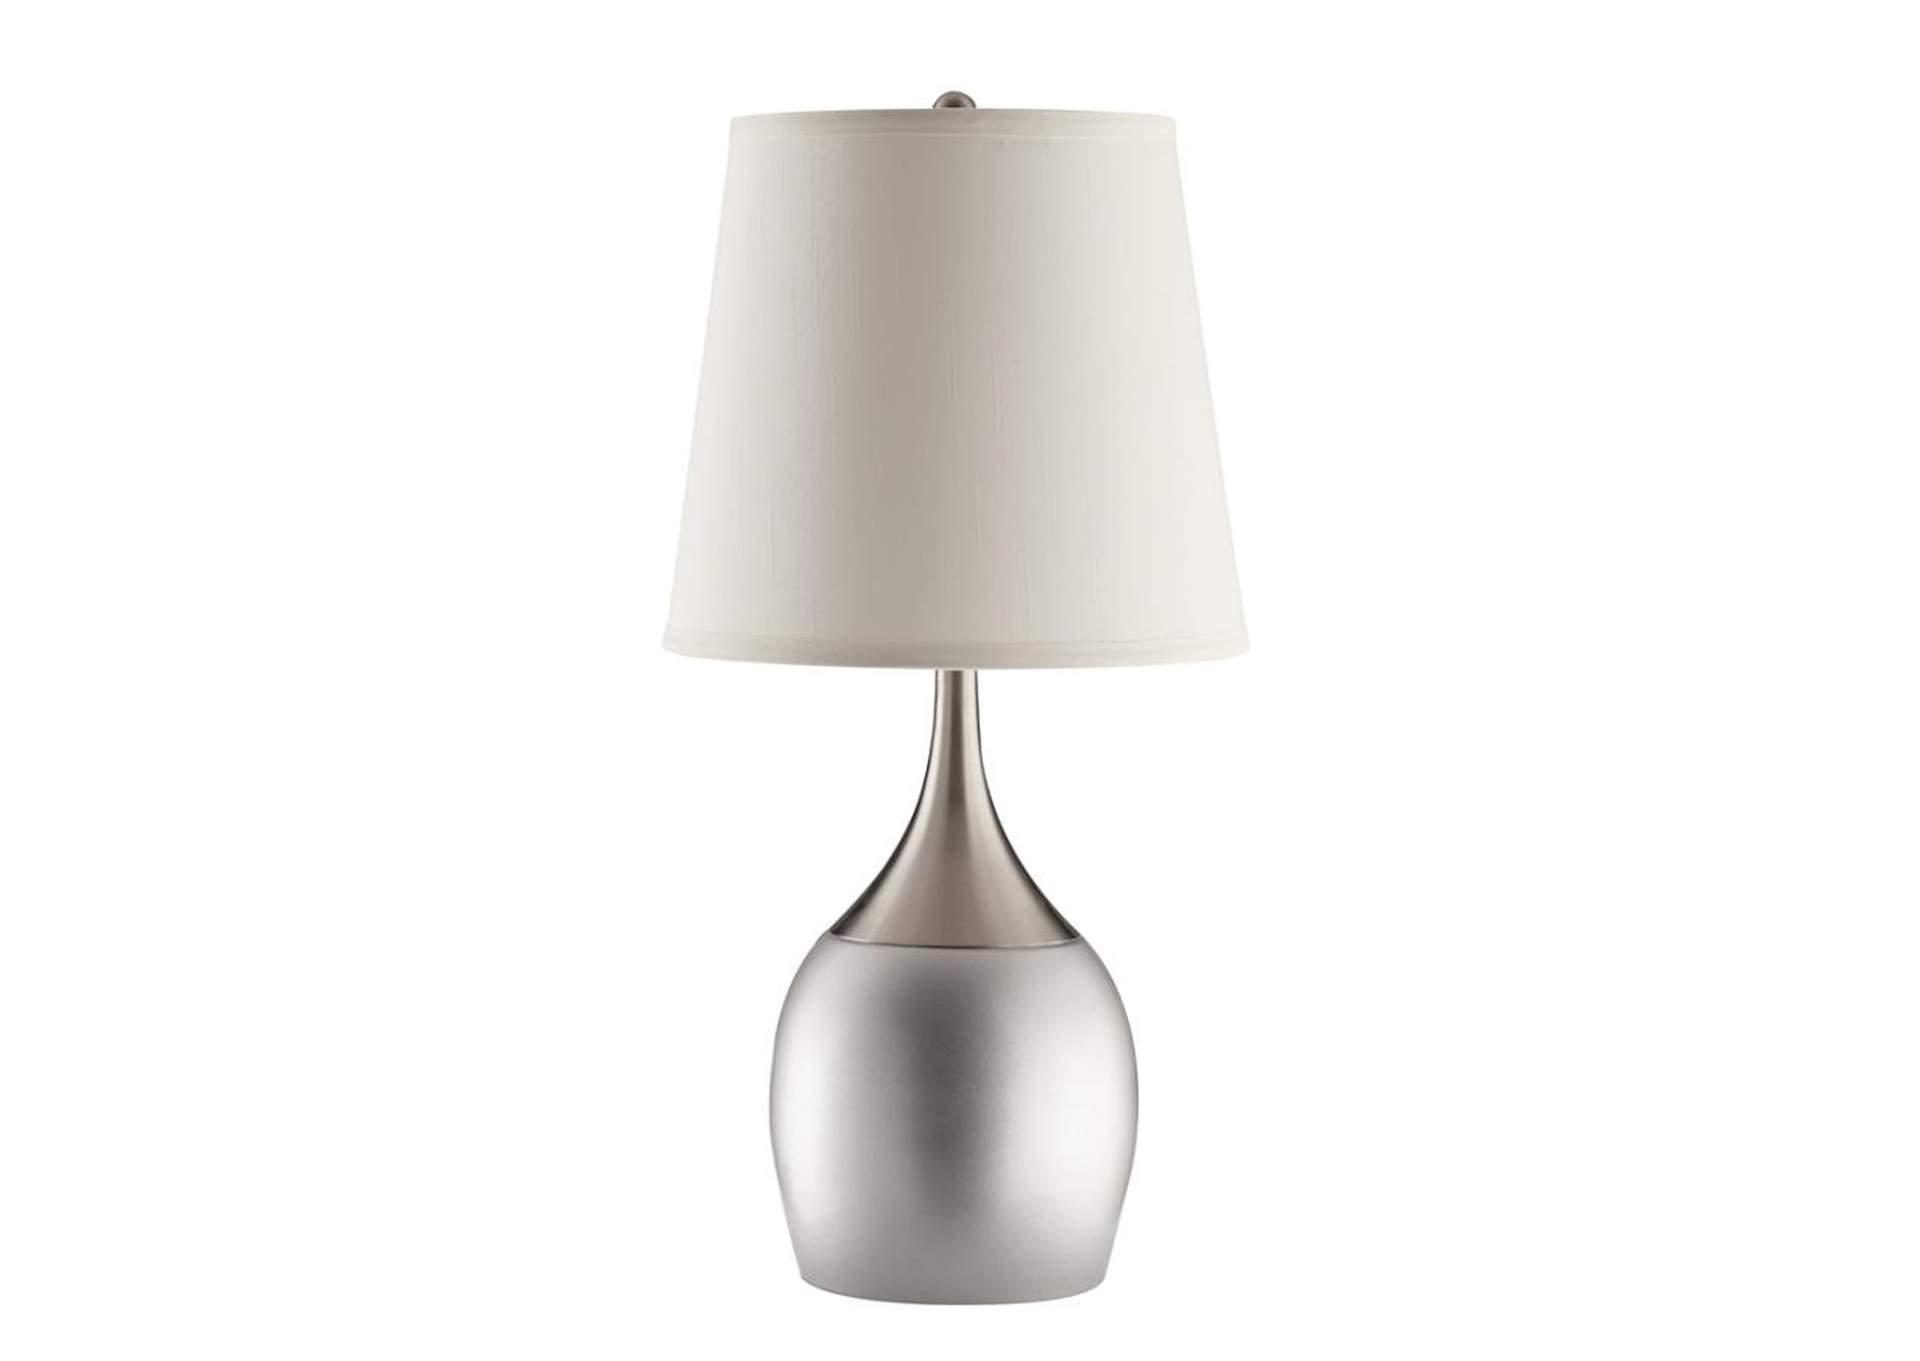 Tenya Empire Shade Table Lamps Silver And Chrome (Set Of 2),Coaster Furniture